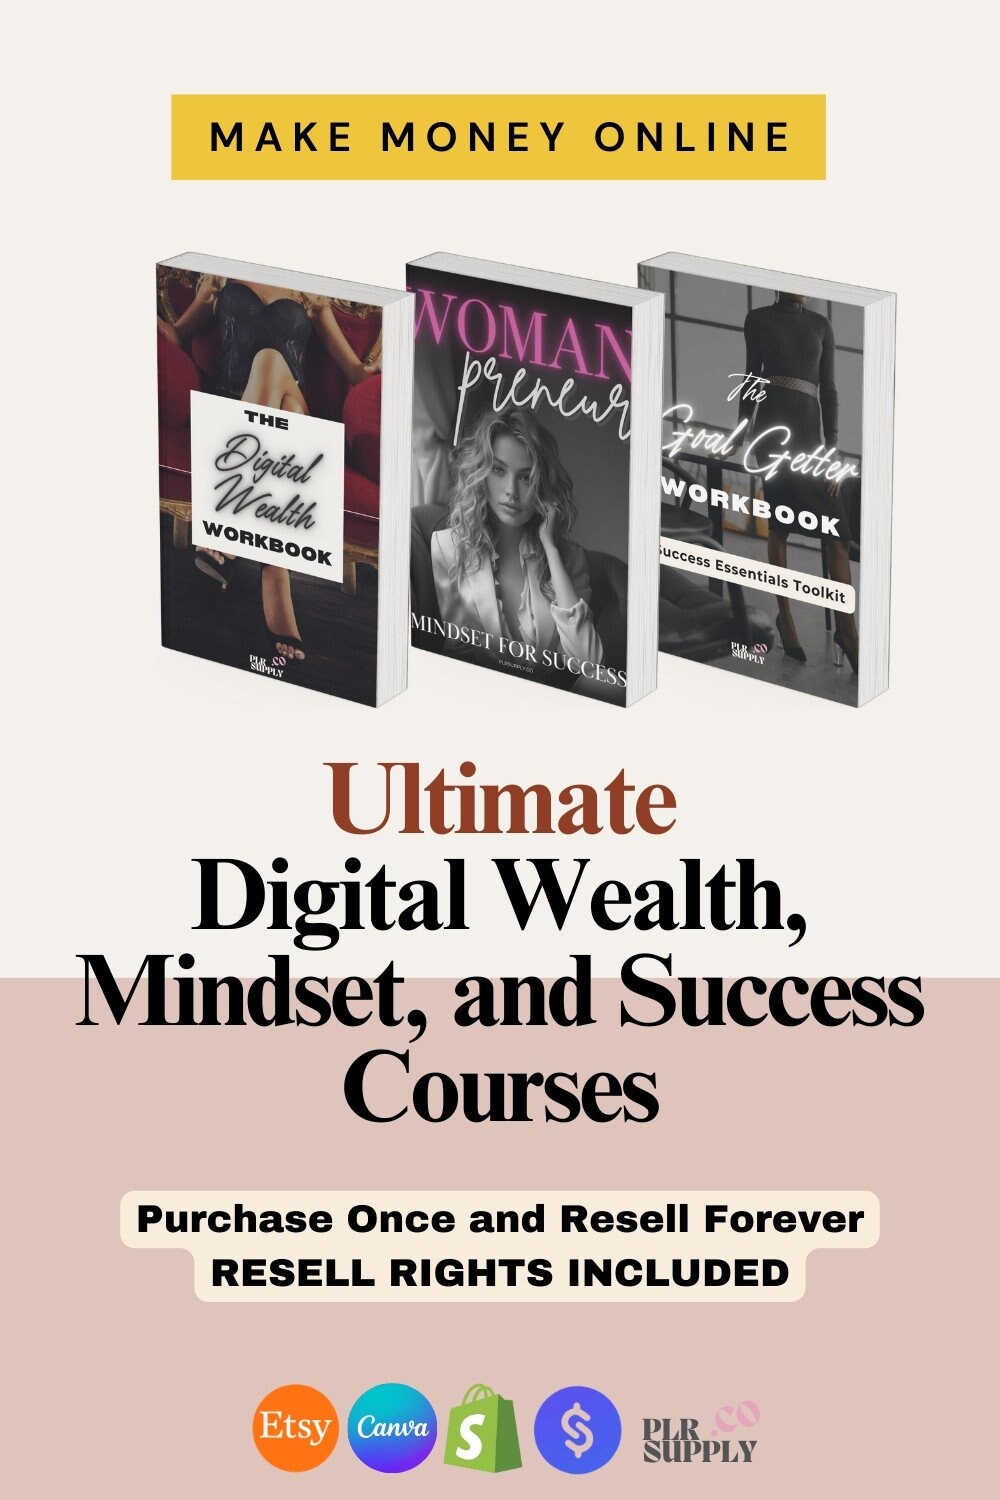 Woman Entrepreneur Wealth Course and Workbook to Make Money Online - DFY Digital Product